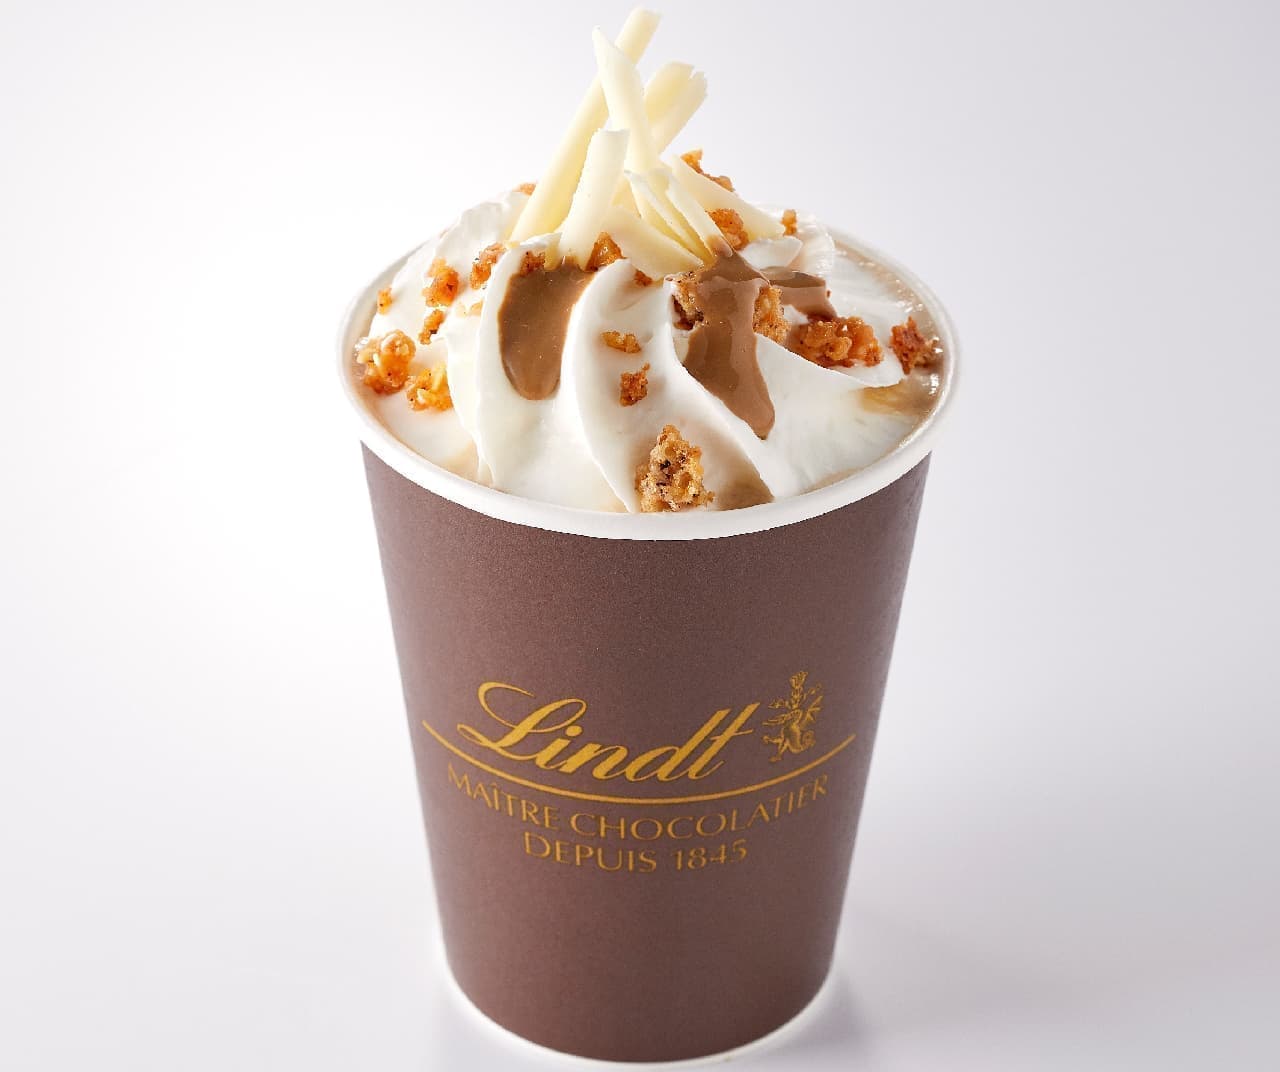 "Lindt hot chocolate drink Mocha" with luxurious Linz chocolate